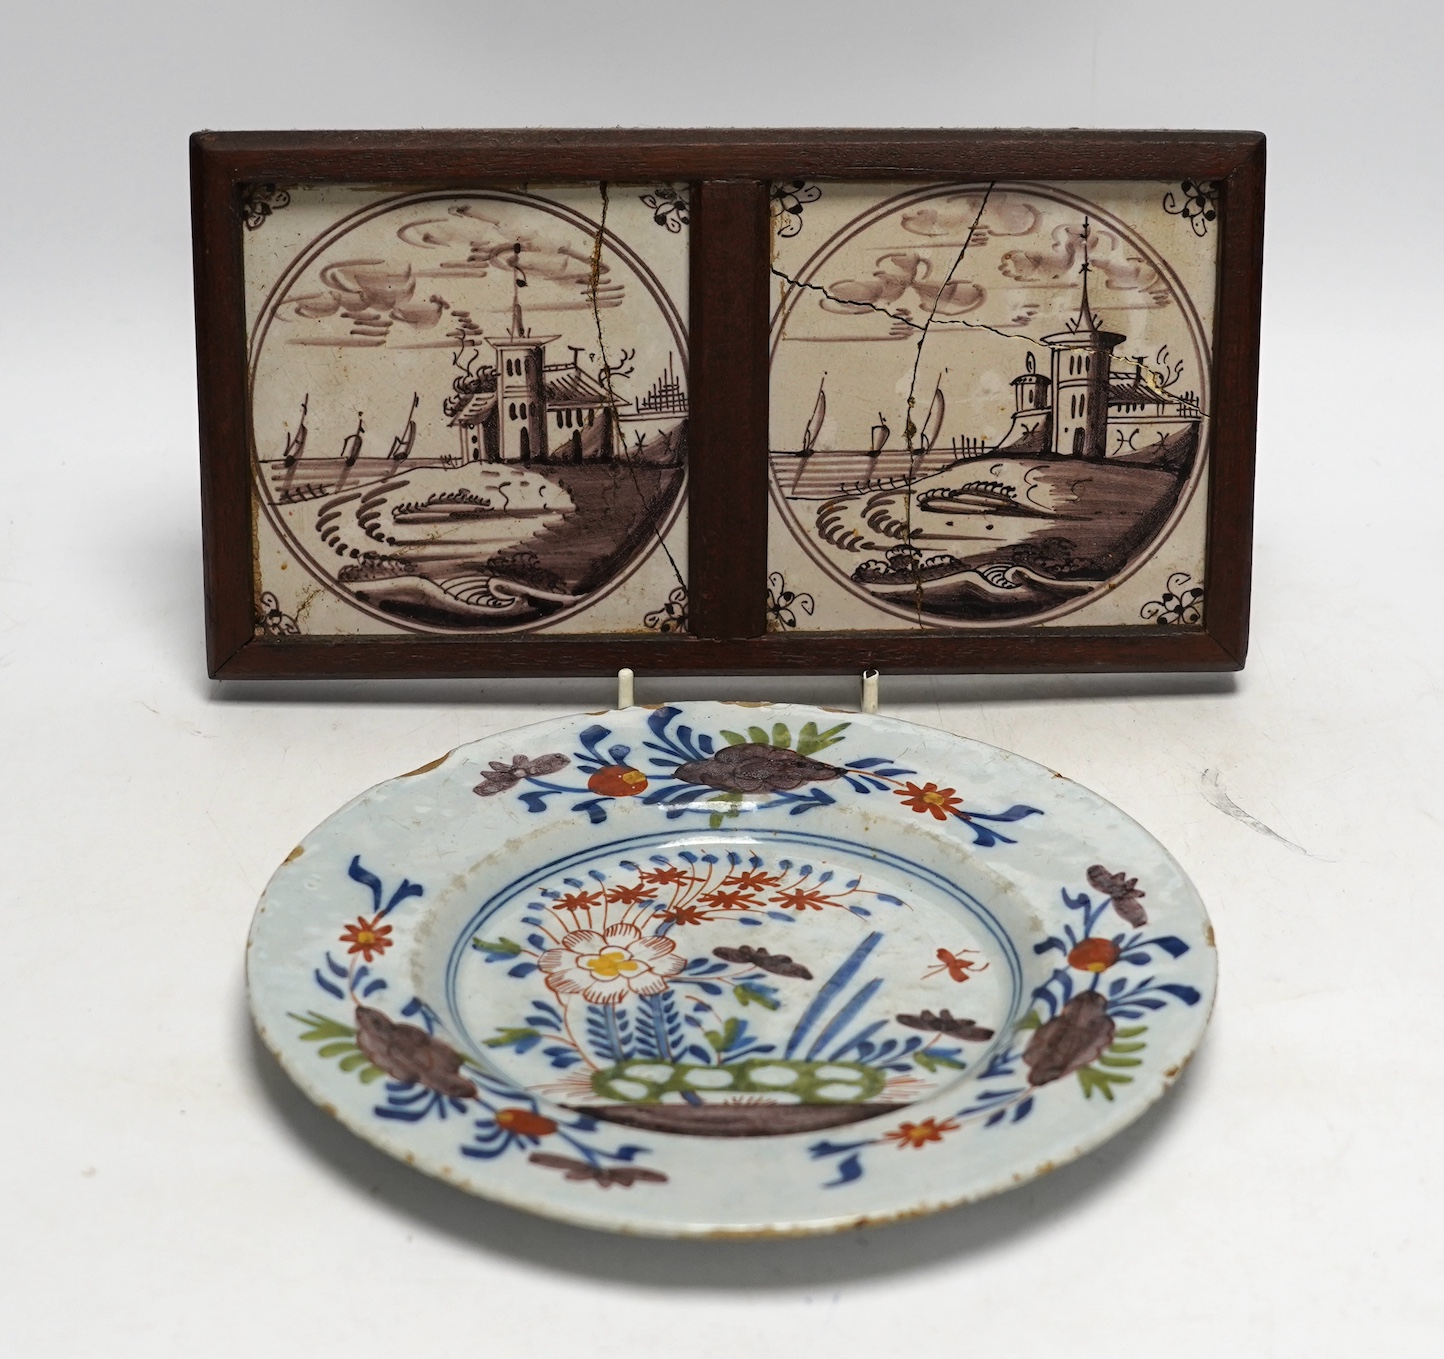 An 18th century Delft polychrome plate, 23cm diameter, and two framed tiles. Condition - tiles poor, plate with usual chipping to edges